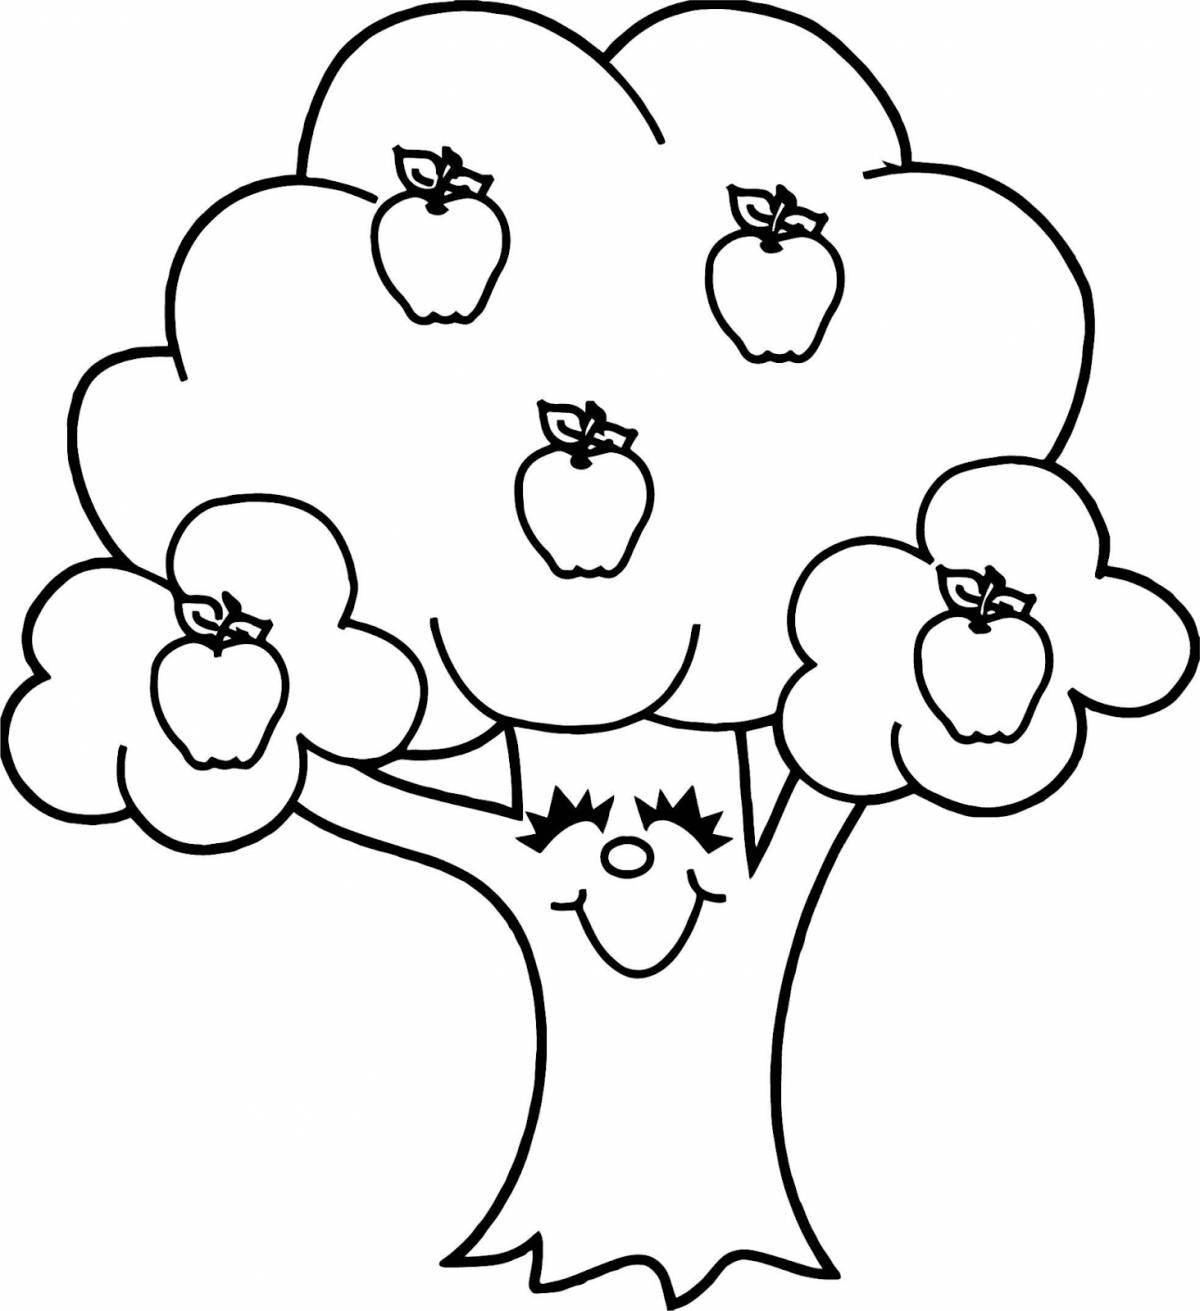 Colorful apple tree with apples for kids